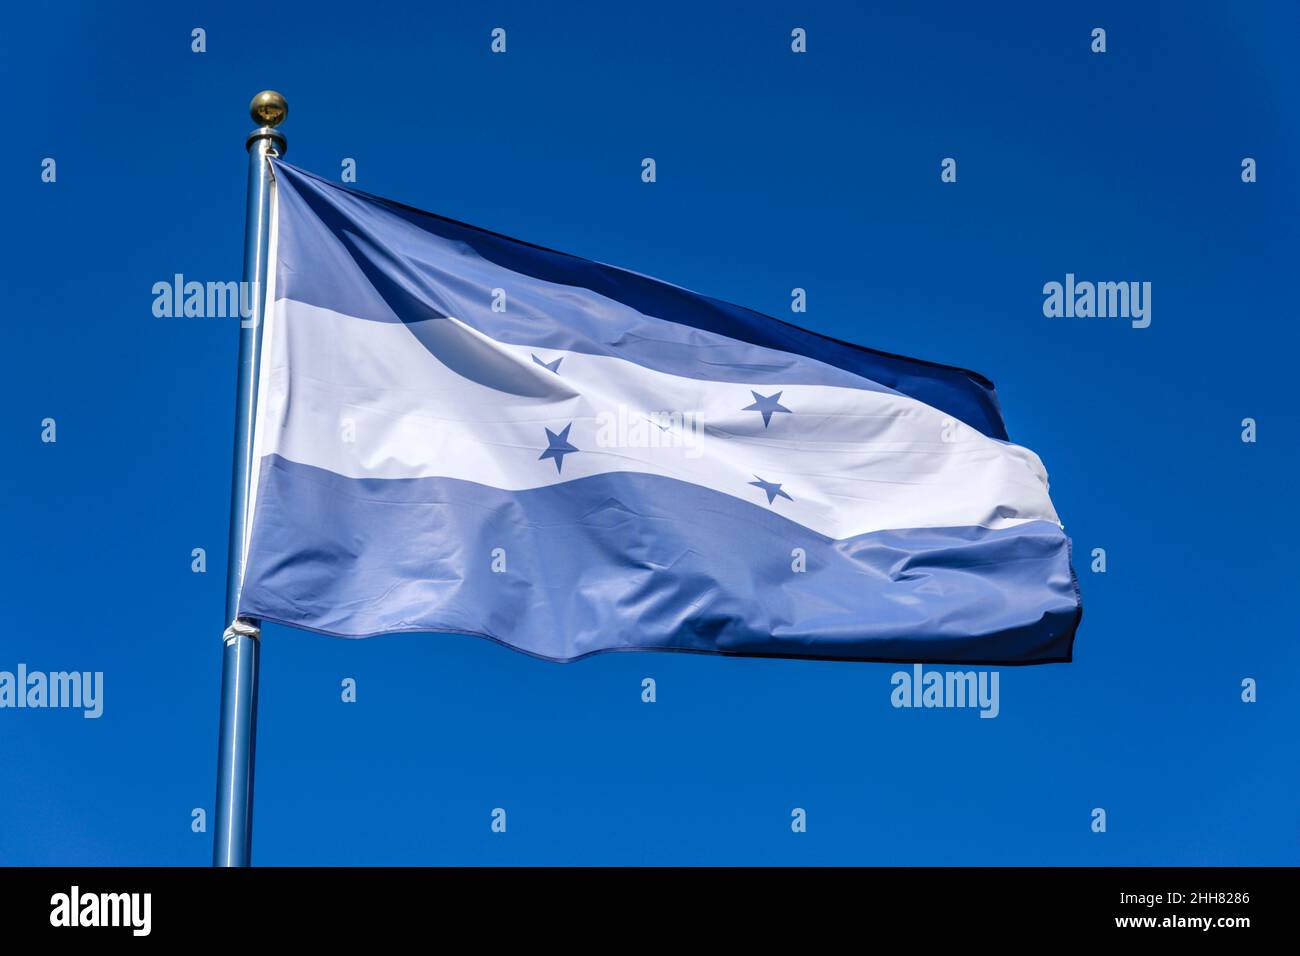 Flag of Honduras on a blue background Stock Photo